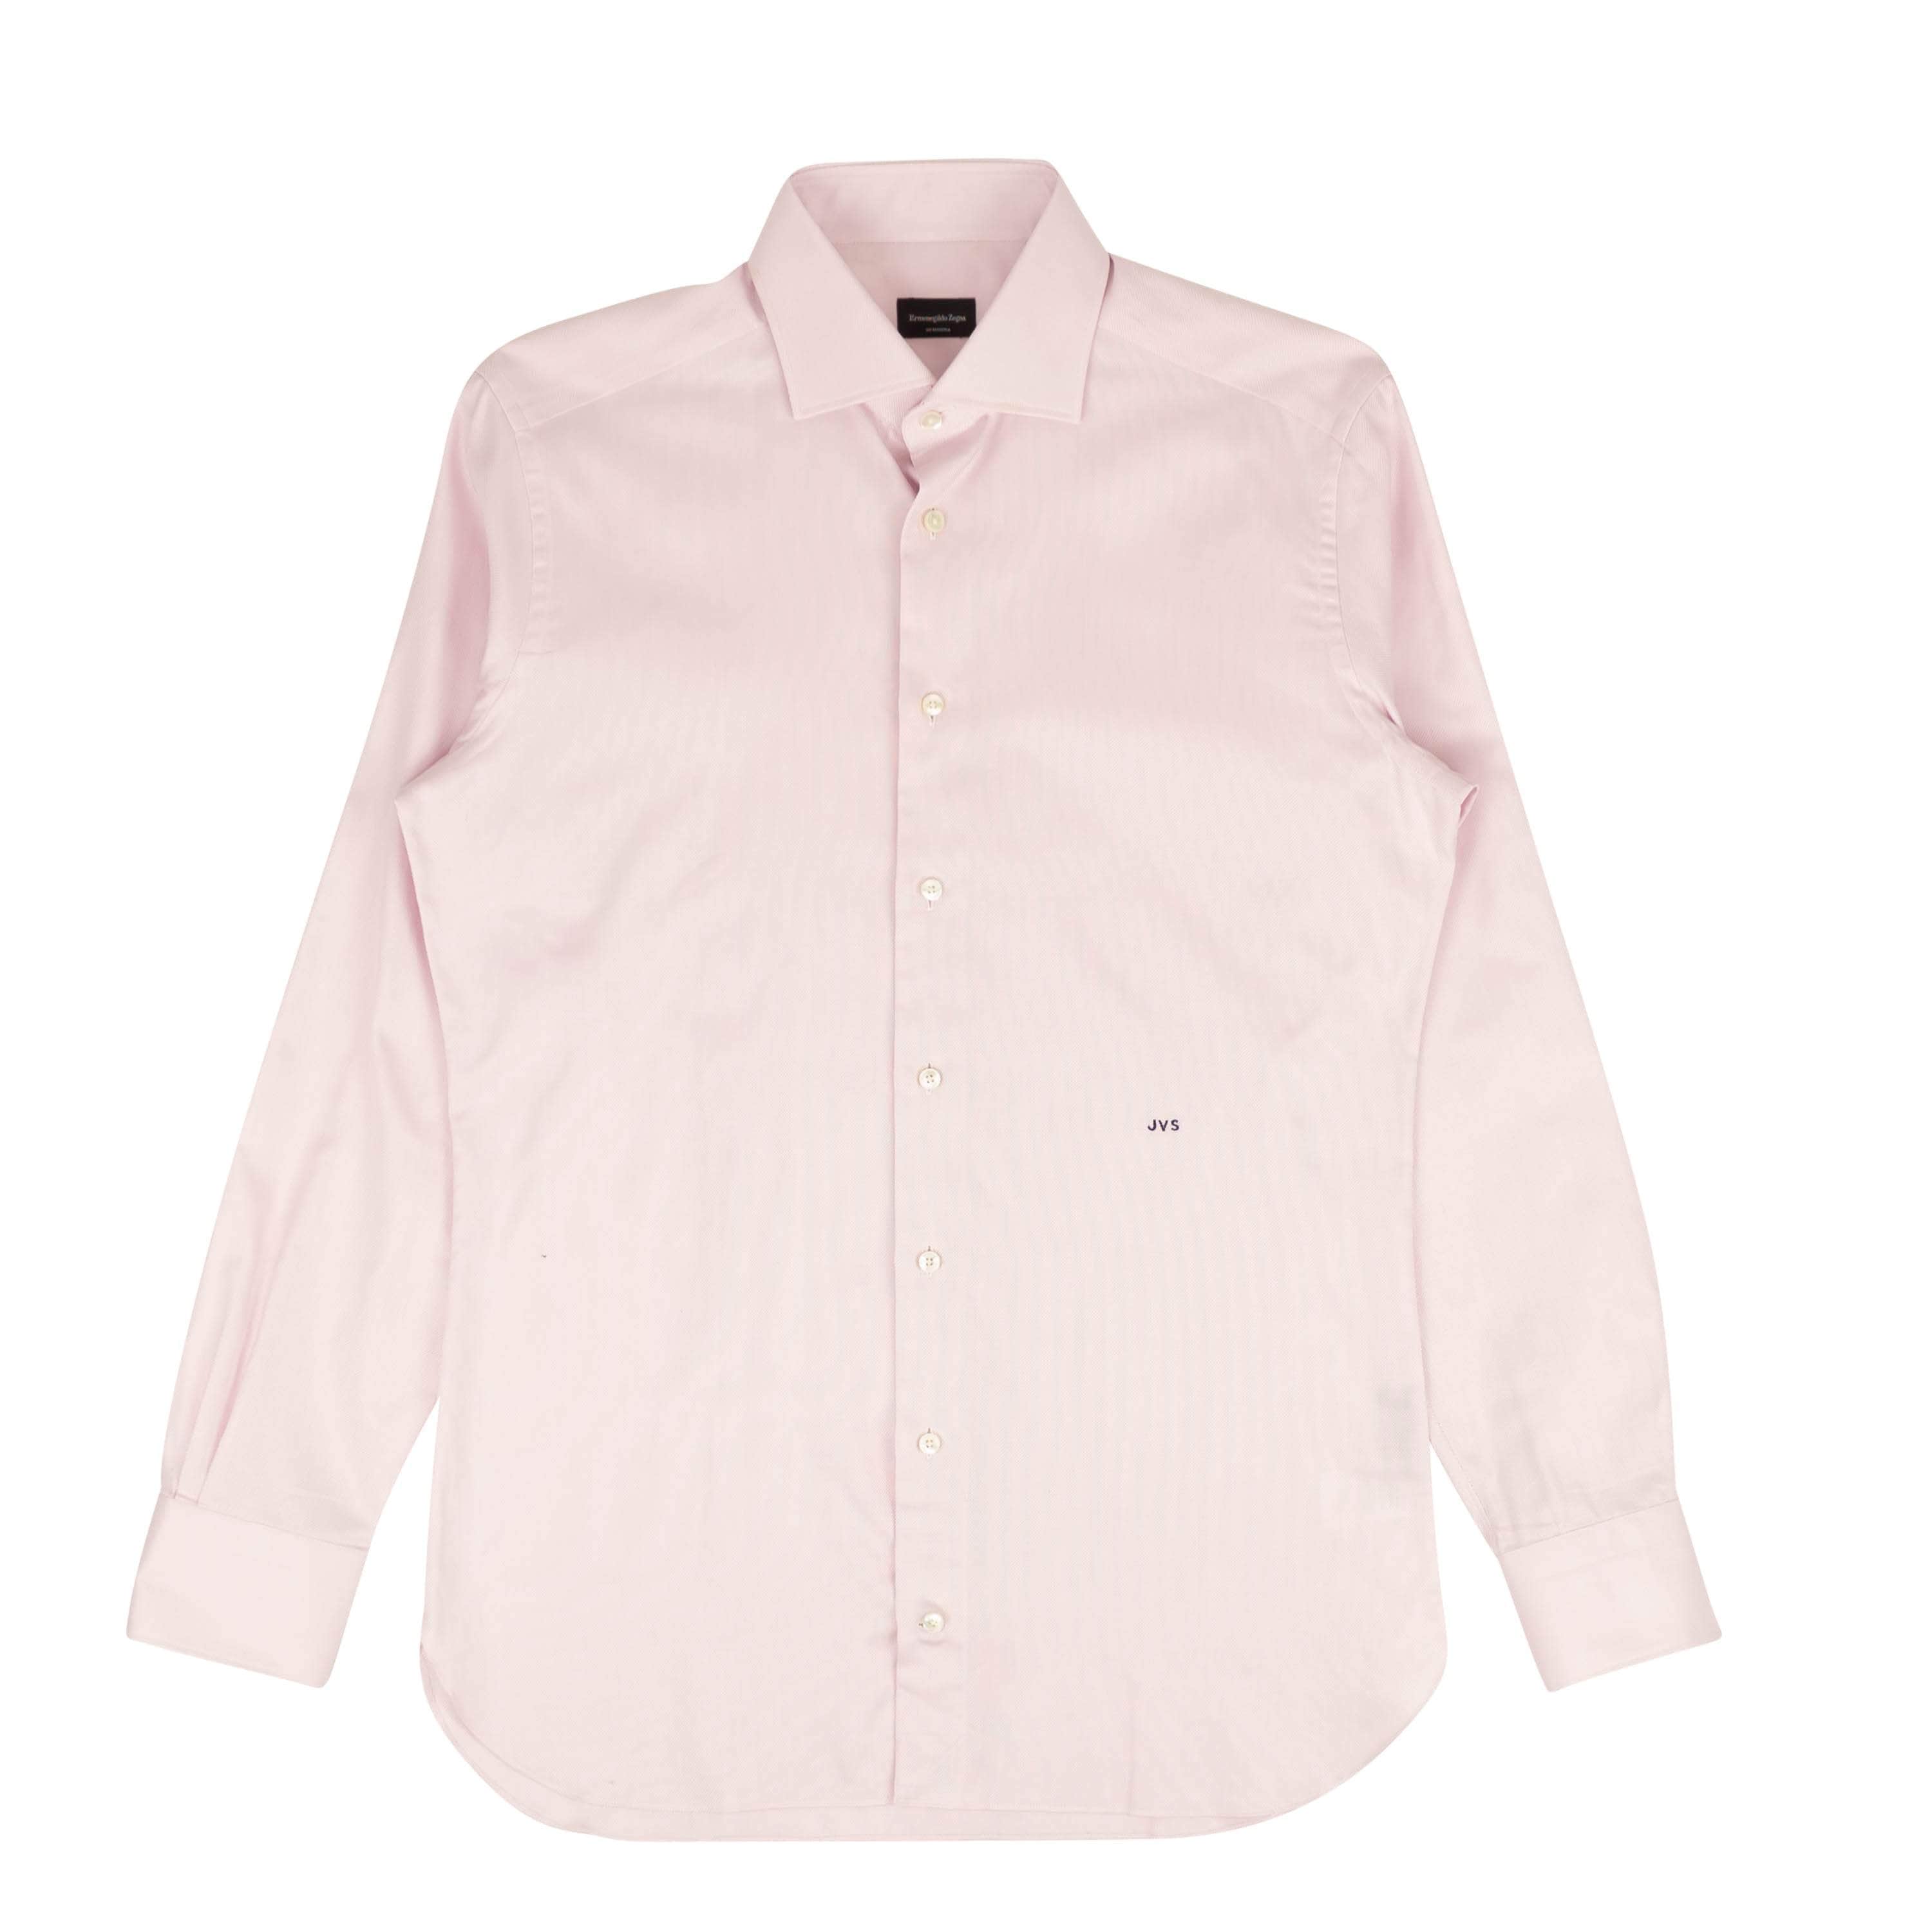 Ermenegildo Zegna 250-500, channelenable-all, chicmi, couponcollection, gender-mens, main-clothing, mens-shoes, size-33 33 Pink Woven Dress Shirt 95-ZGN-1012/33 95-ZGN-1012/33